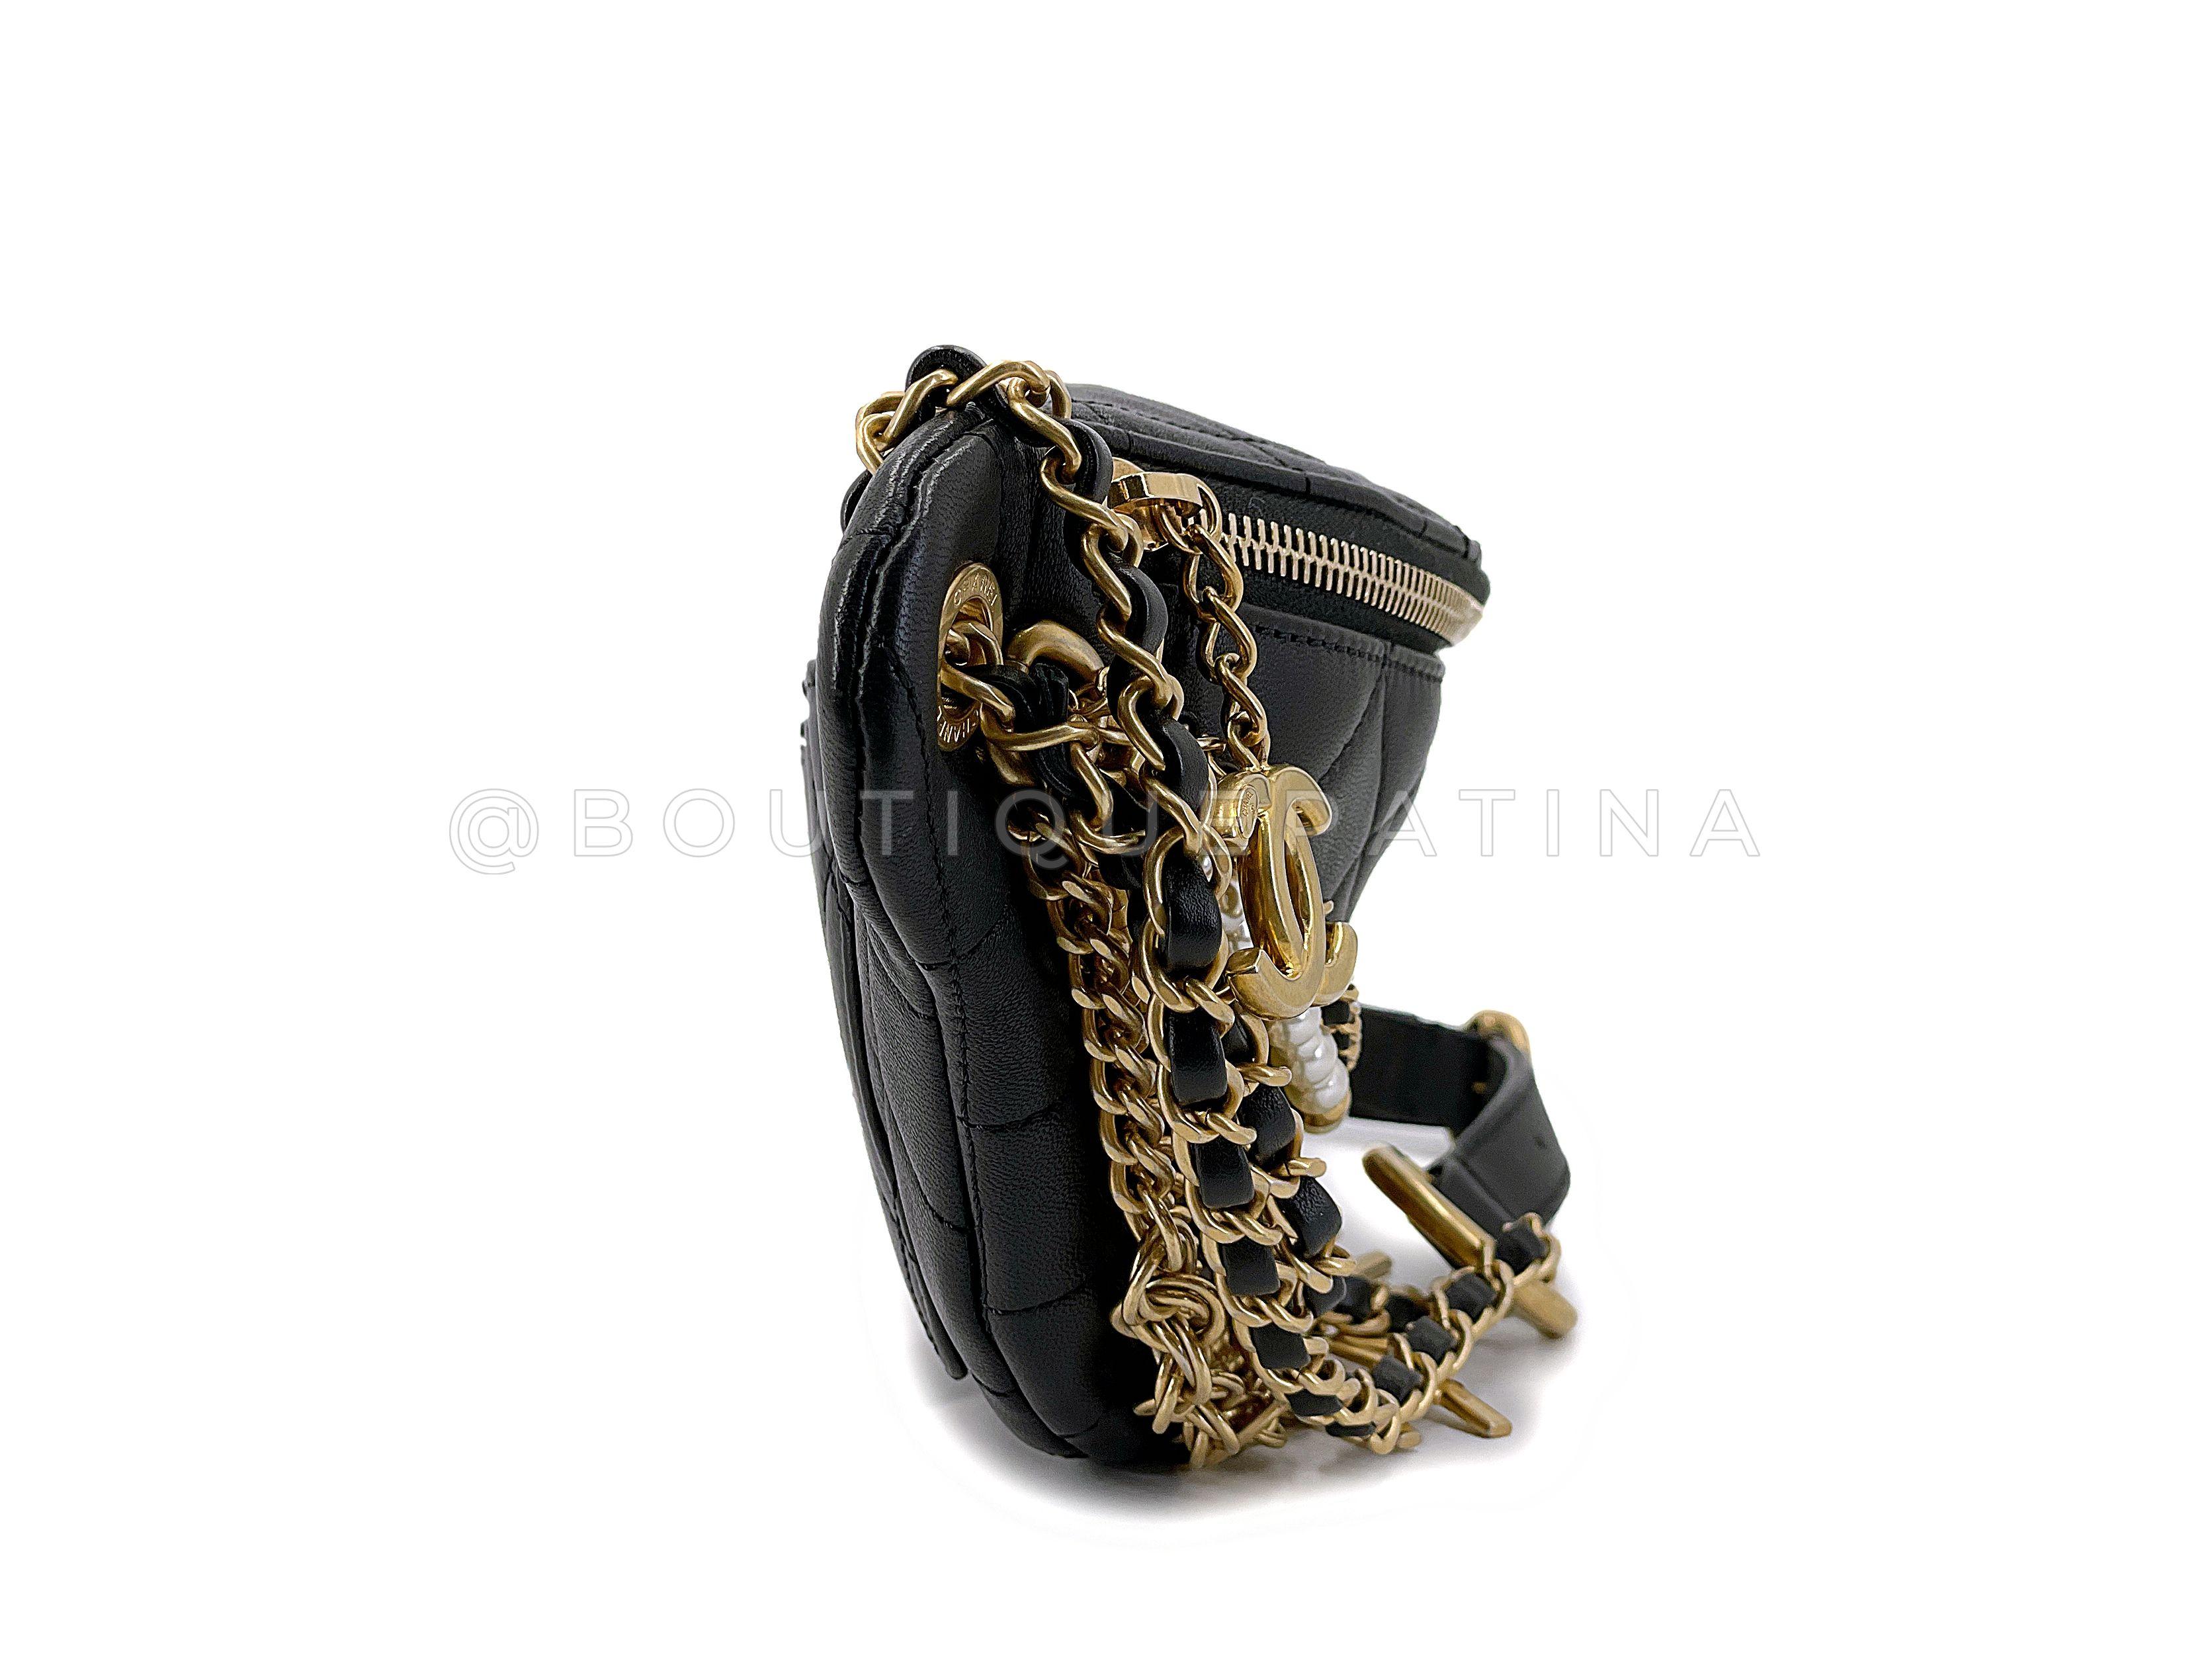 Chanel 19A Black All About Chains Pearl Fanny Pack Bag GHW 67686 In Excellent Condition For Sale In Costa Mesa, CA